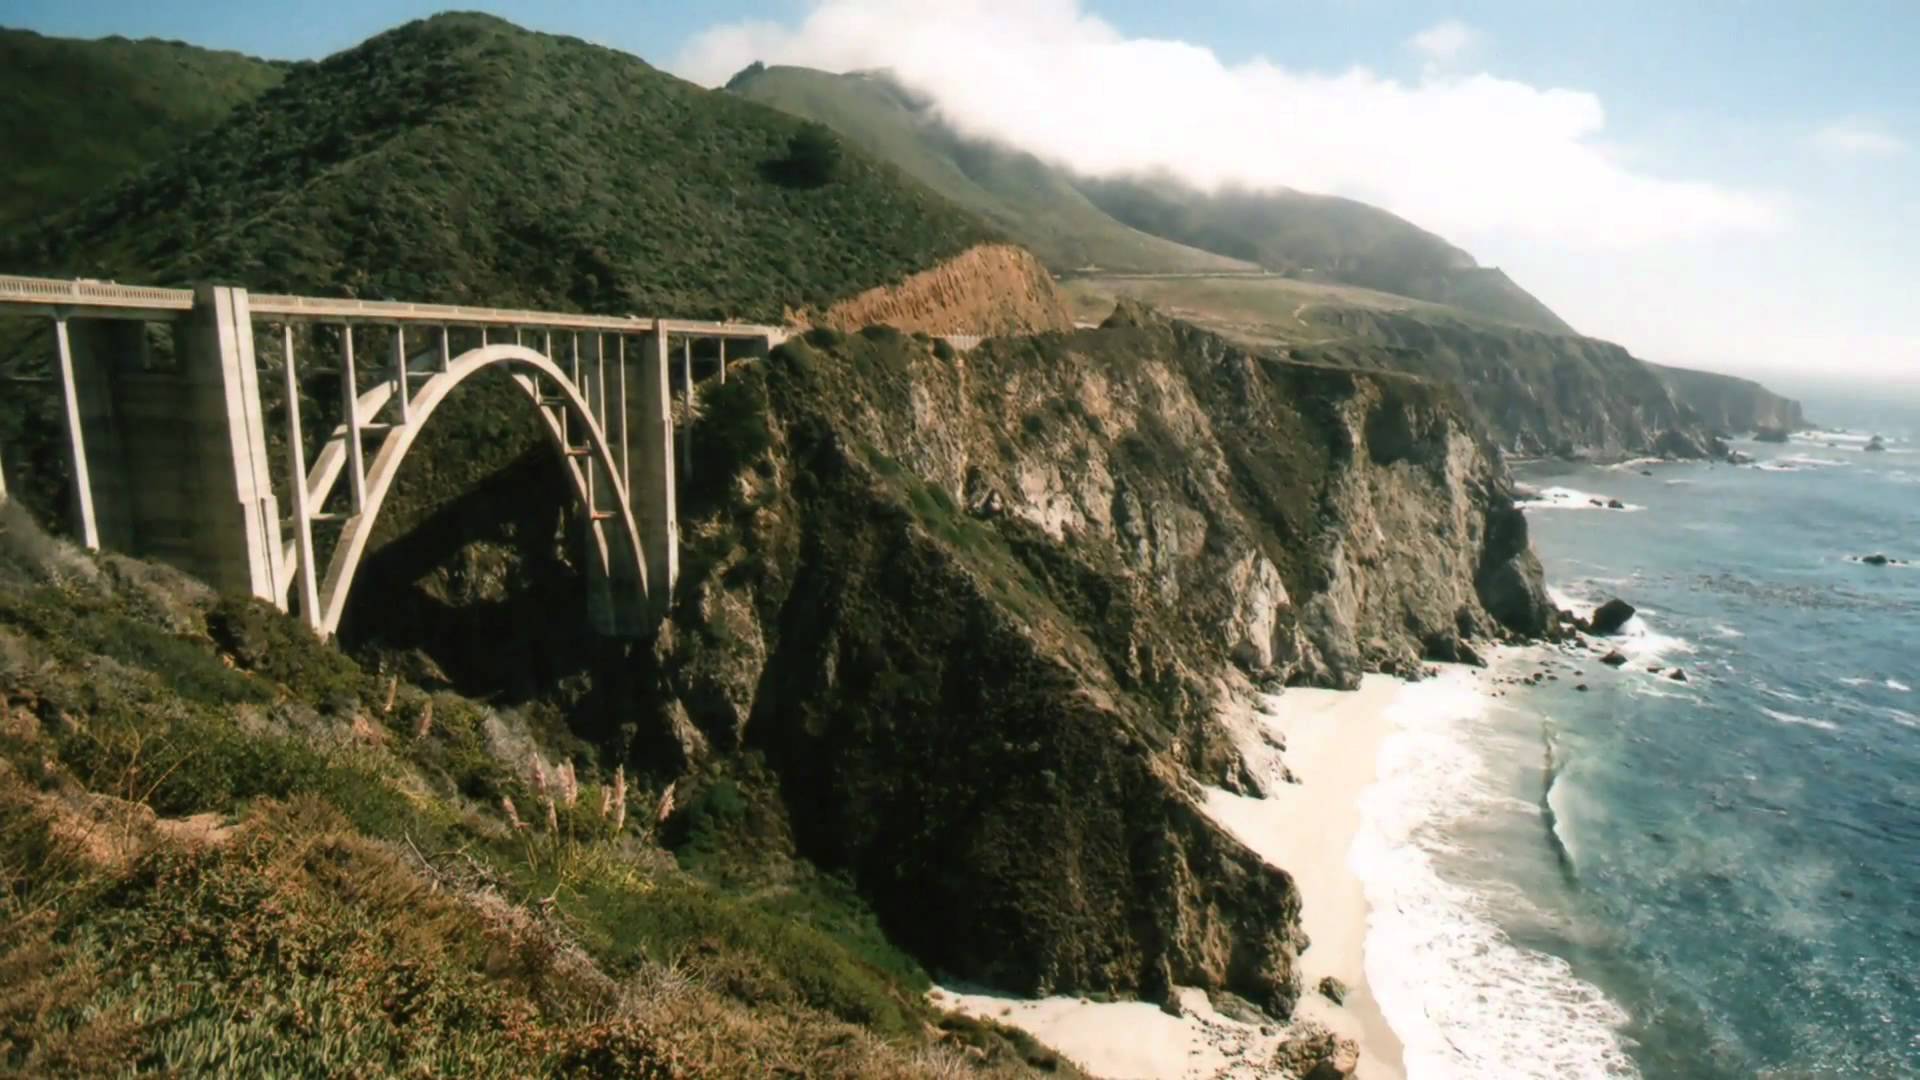 The Pacific Coast Highway. The Coolest Stuff on the Planet